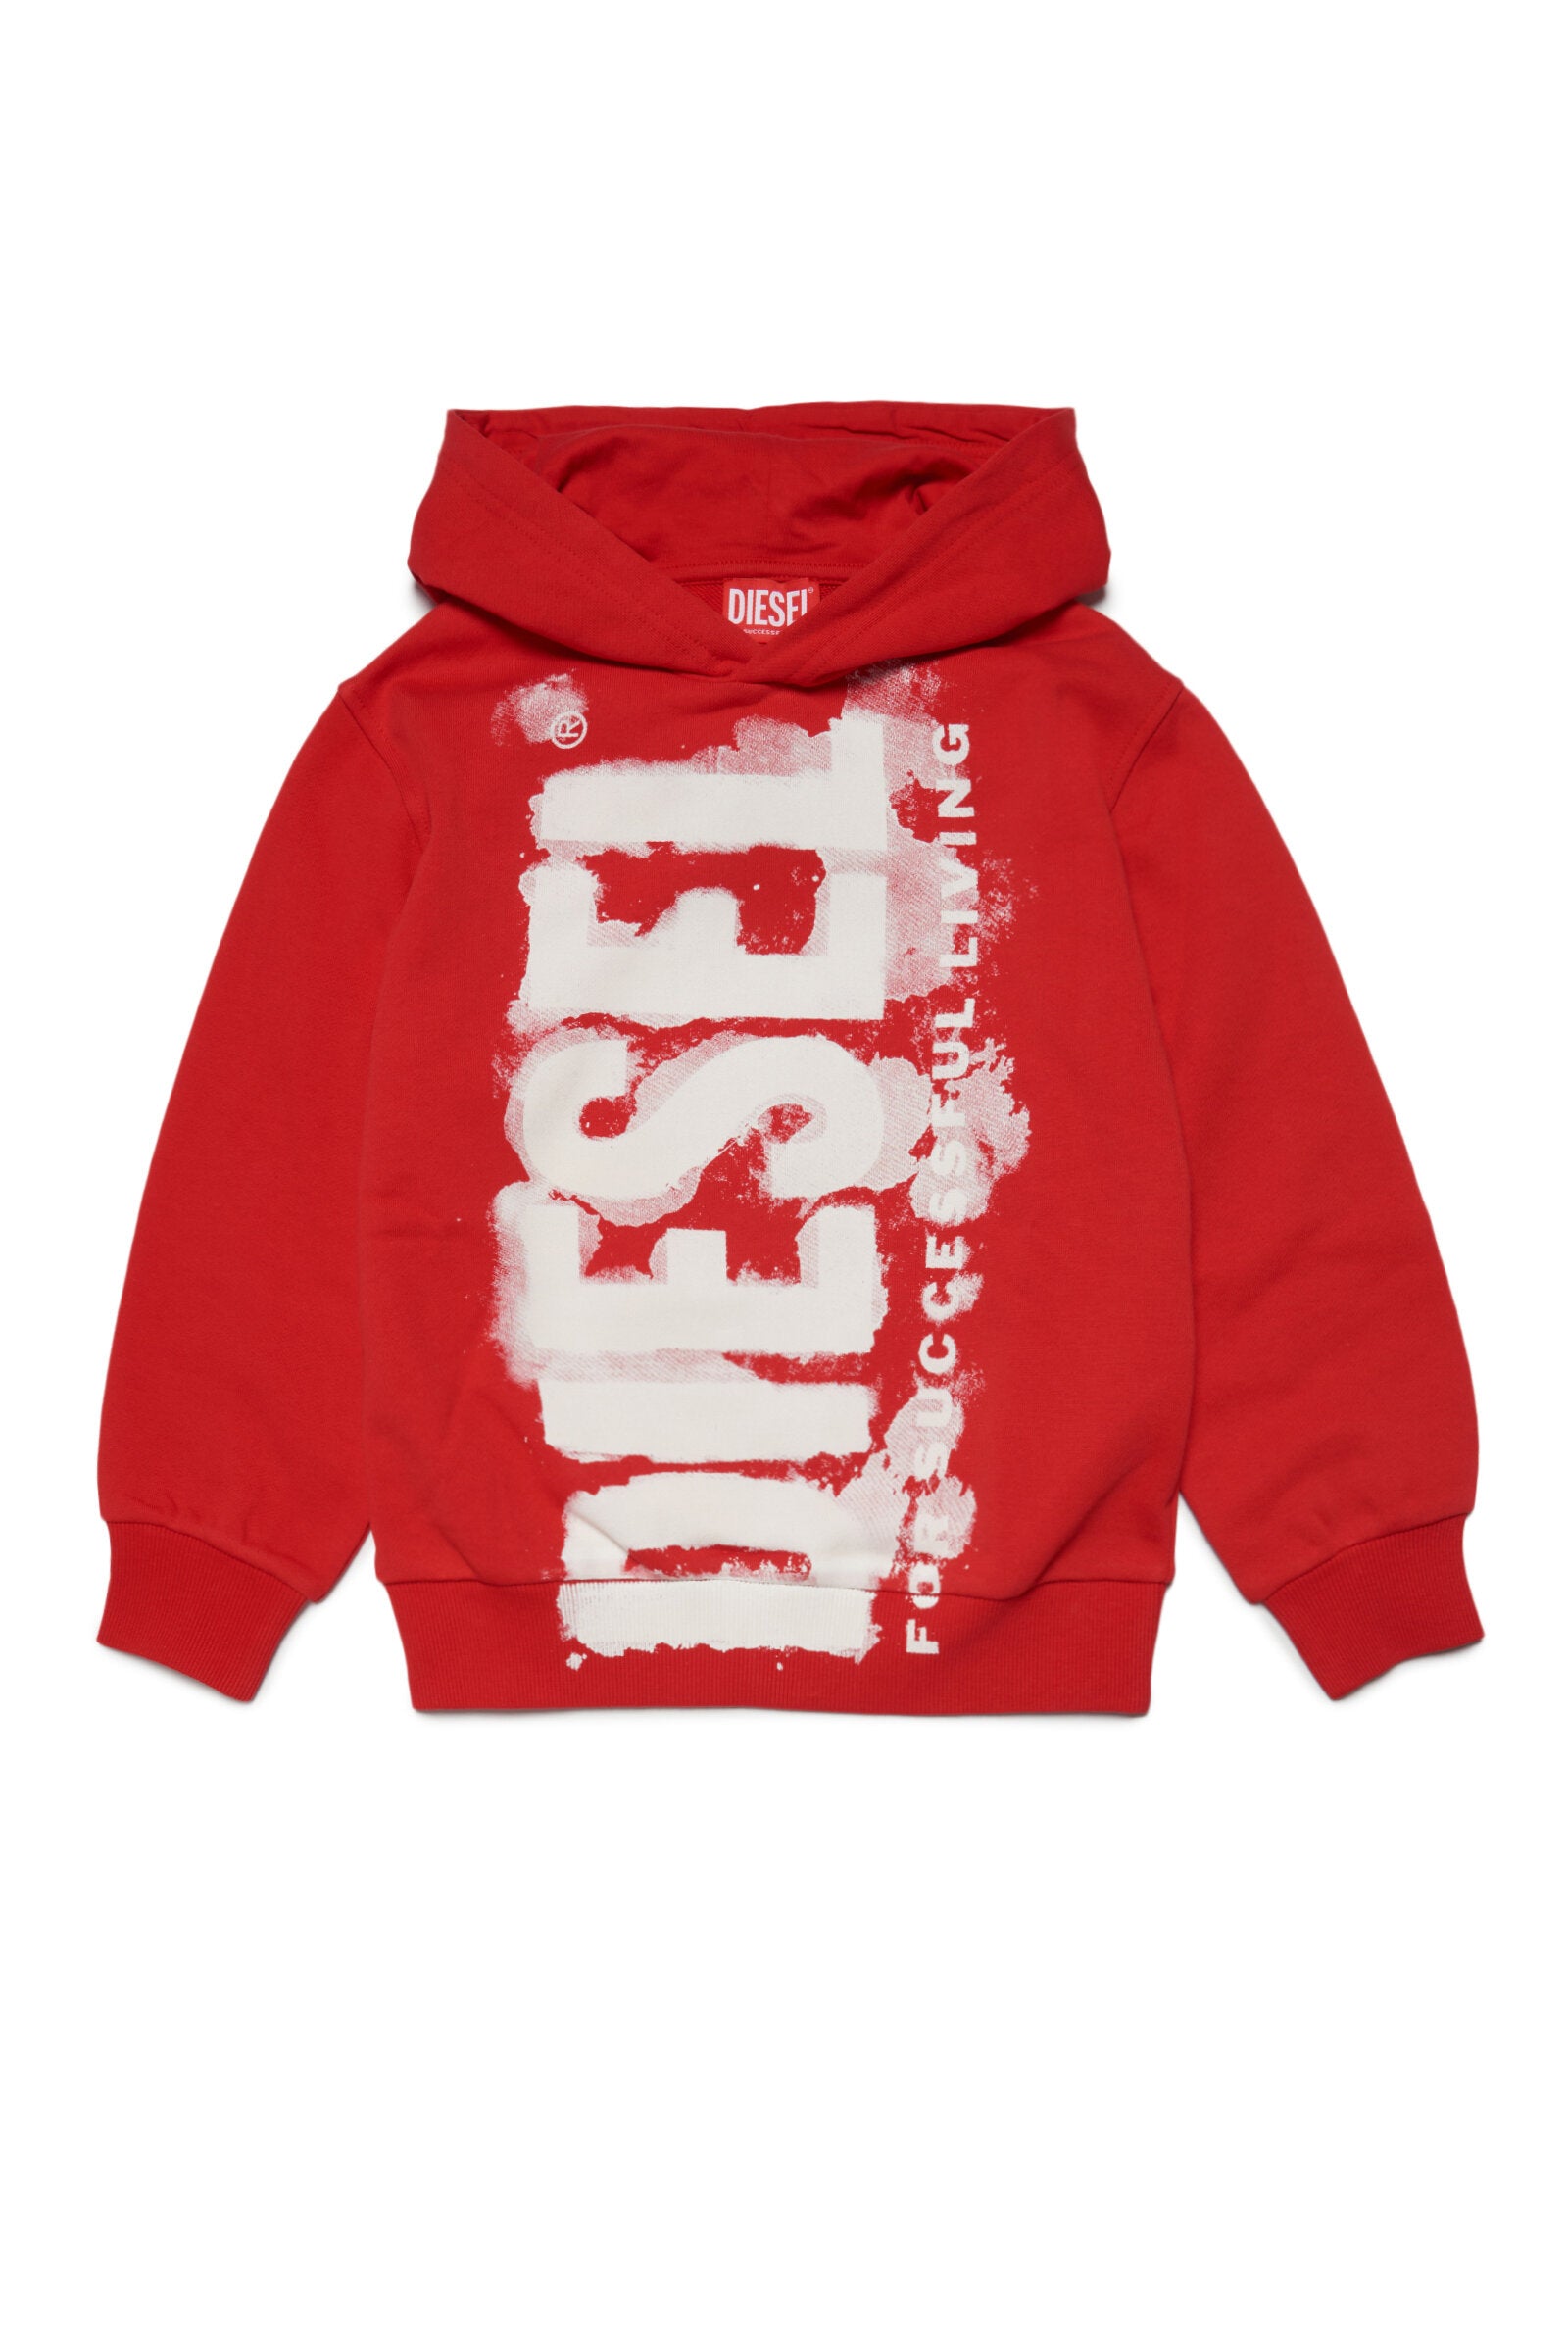 logo | red sweatshirt for Diesel with watercolour effect Brave children Kid hooded